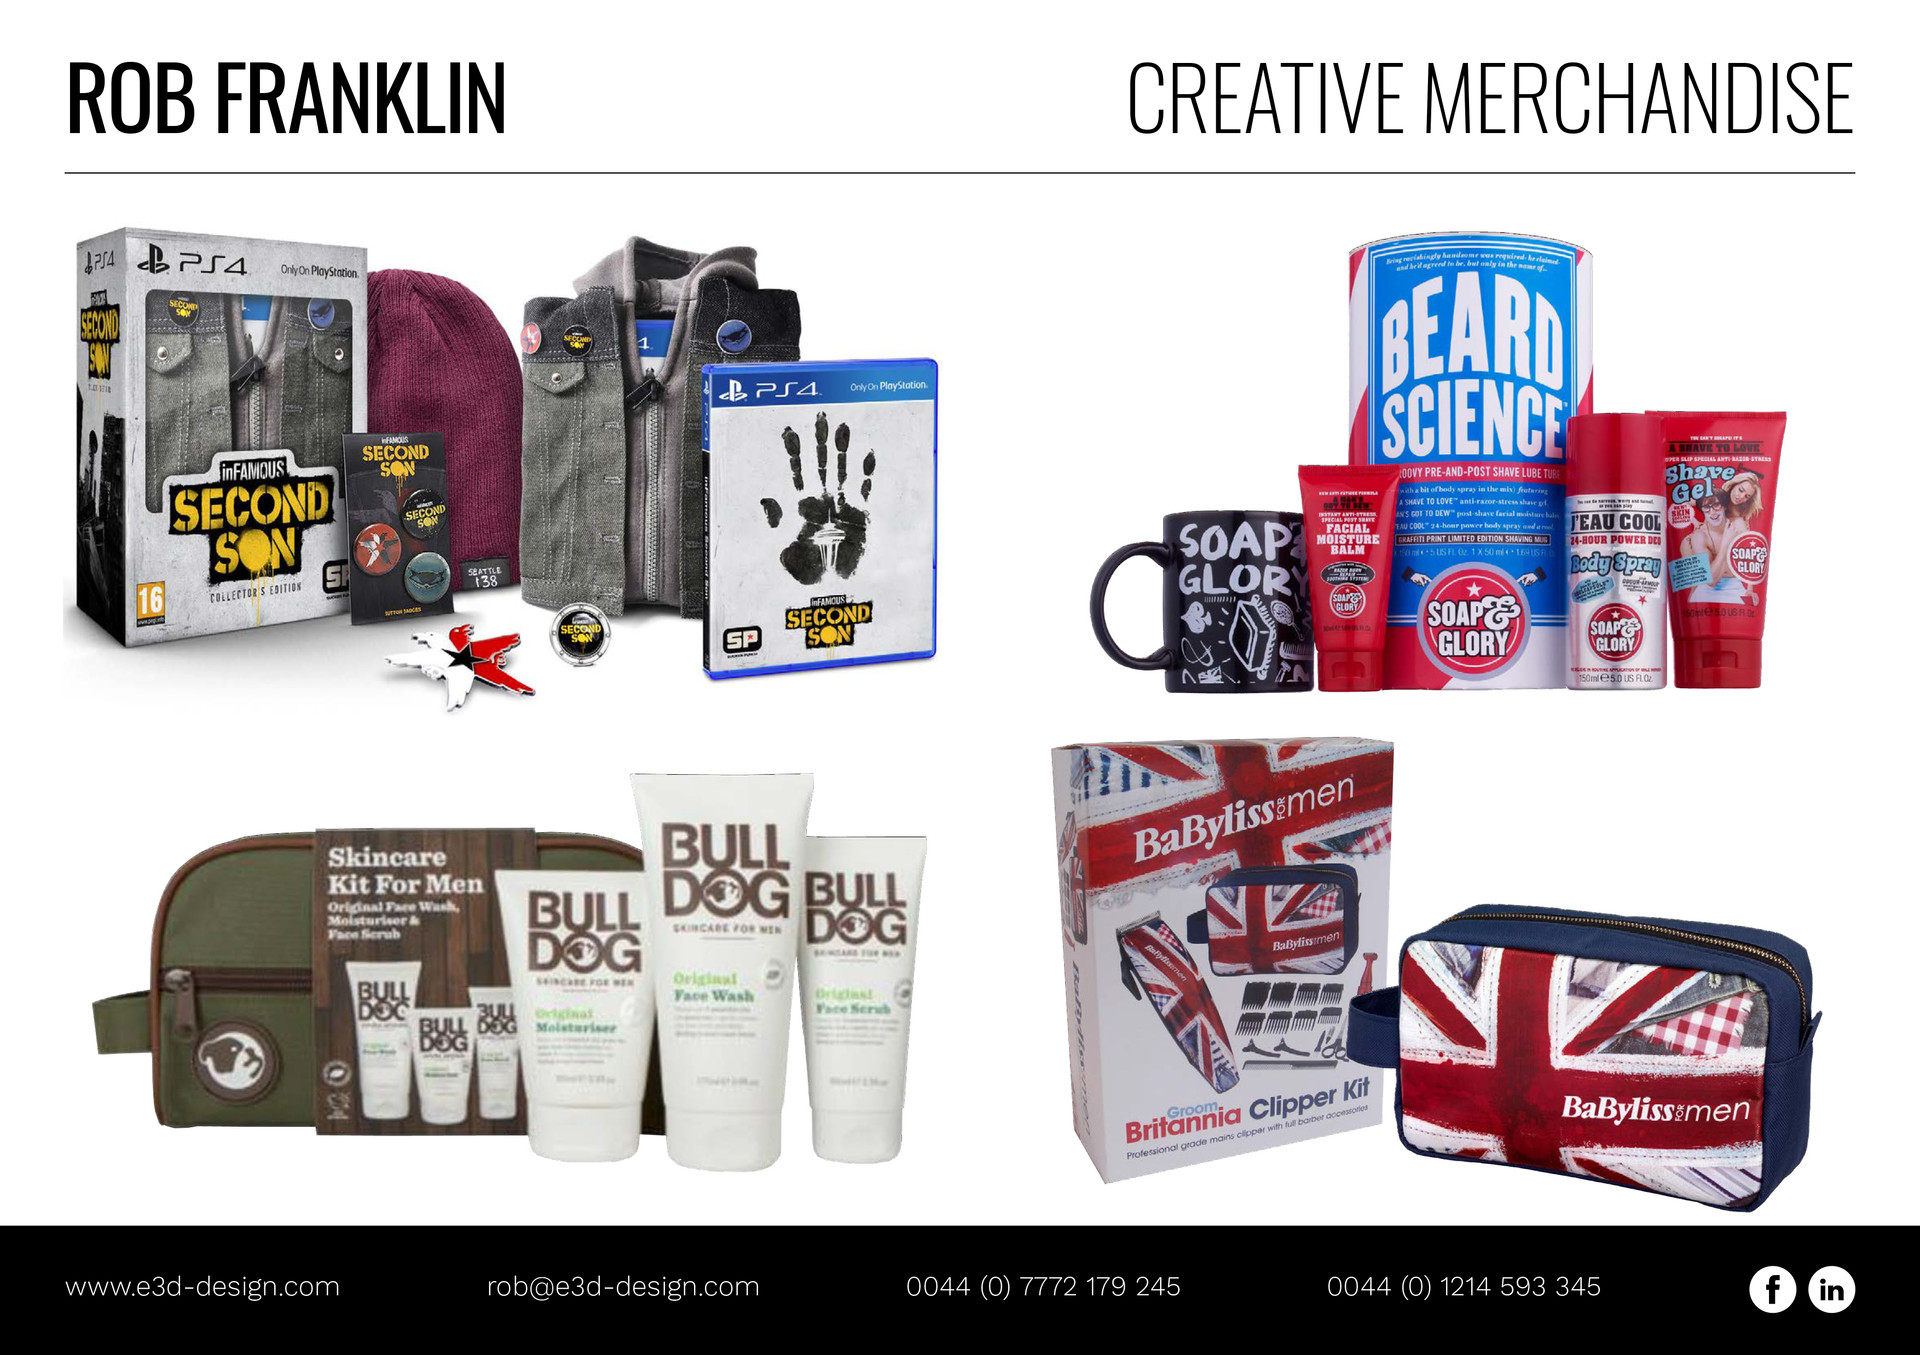 Creative Merchandise and Gift With Purchase